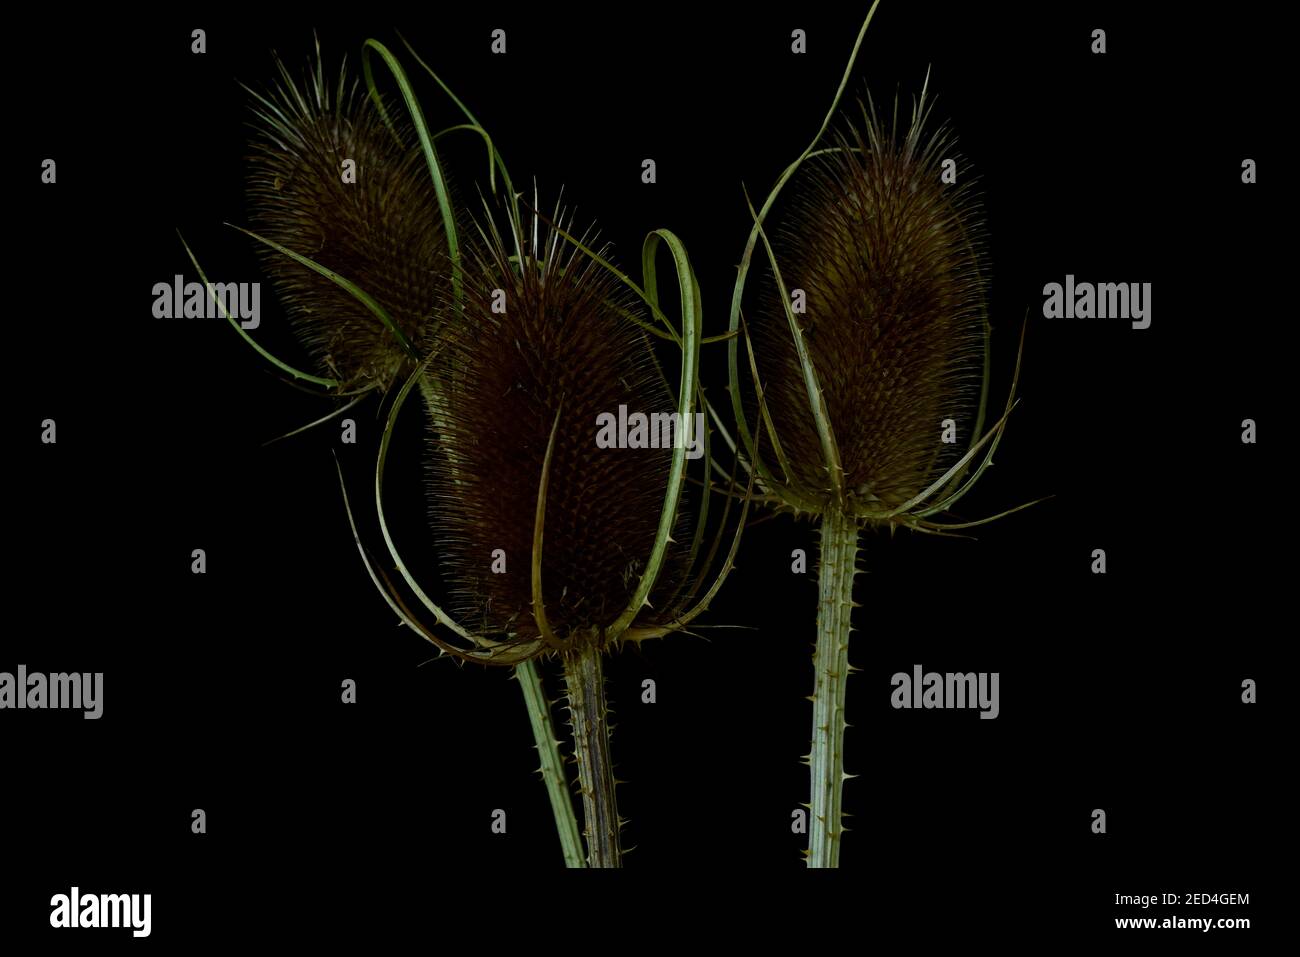 Flowers against a black background.  Wild teasel dry inflorescence (Dipsacus fullonum). Stock Photo